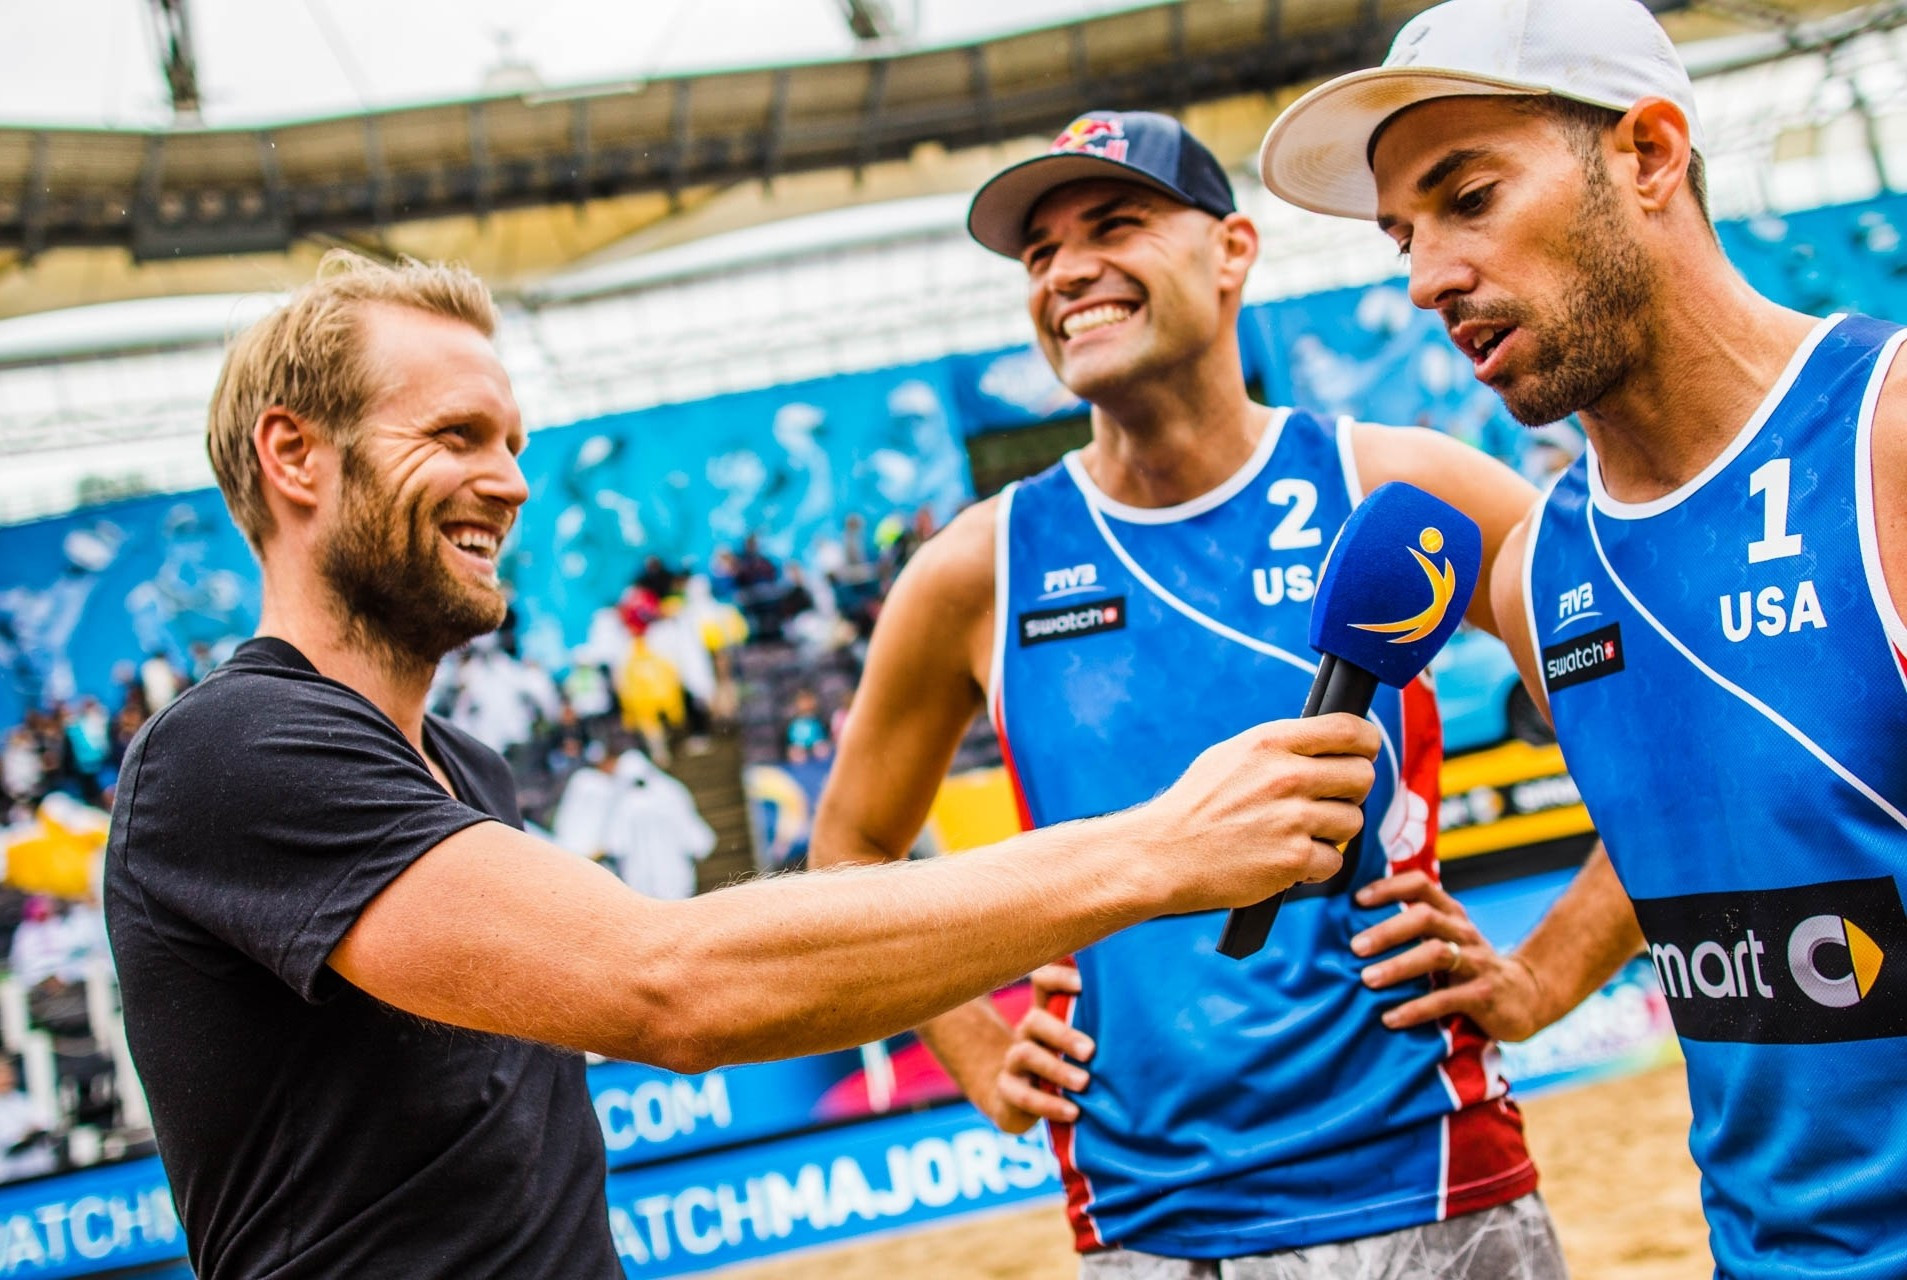 
The United States' Phil Dalhausser and Nick Lucena are the top seeds in the men's event ©Swatch Major Series